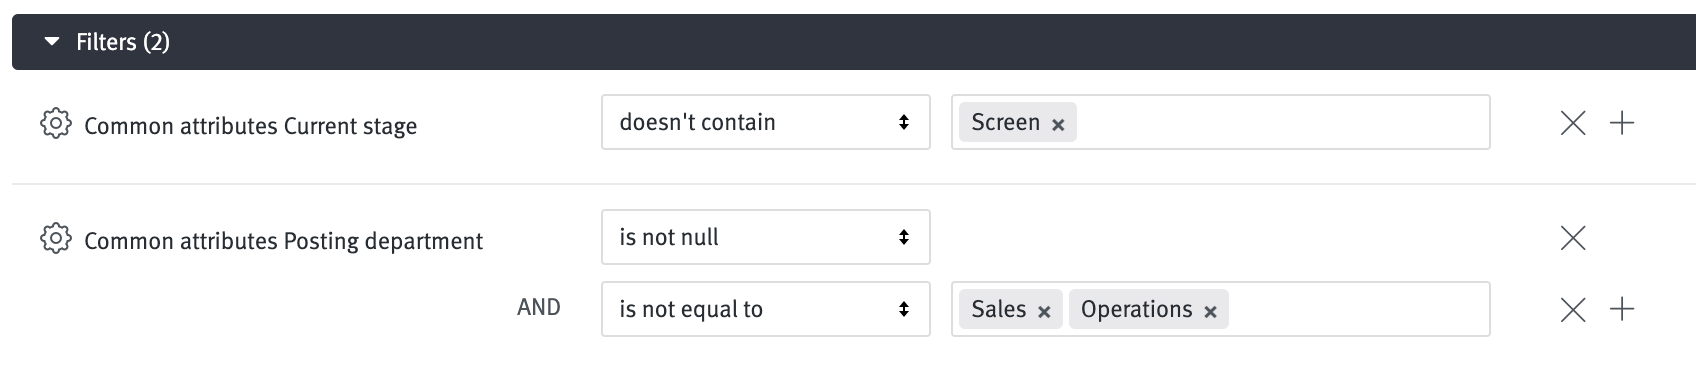 Two data fields added as filters in the Filters section of the chart builder.